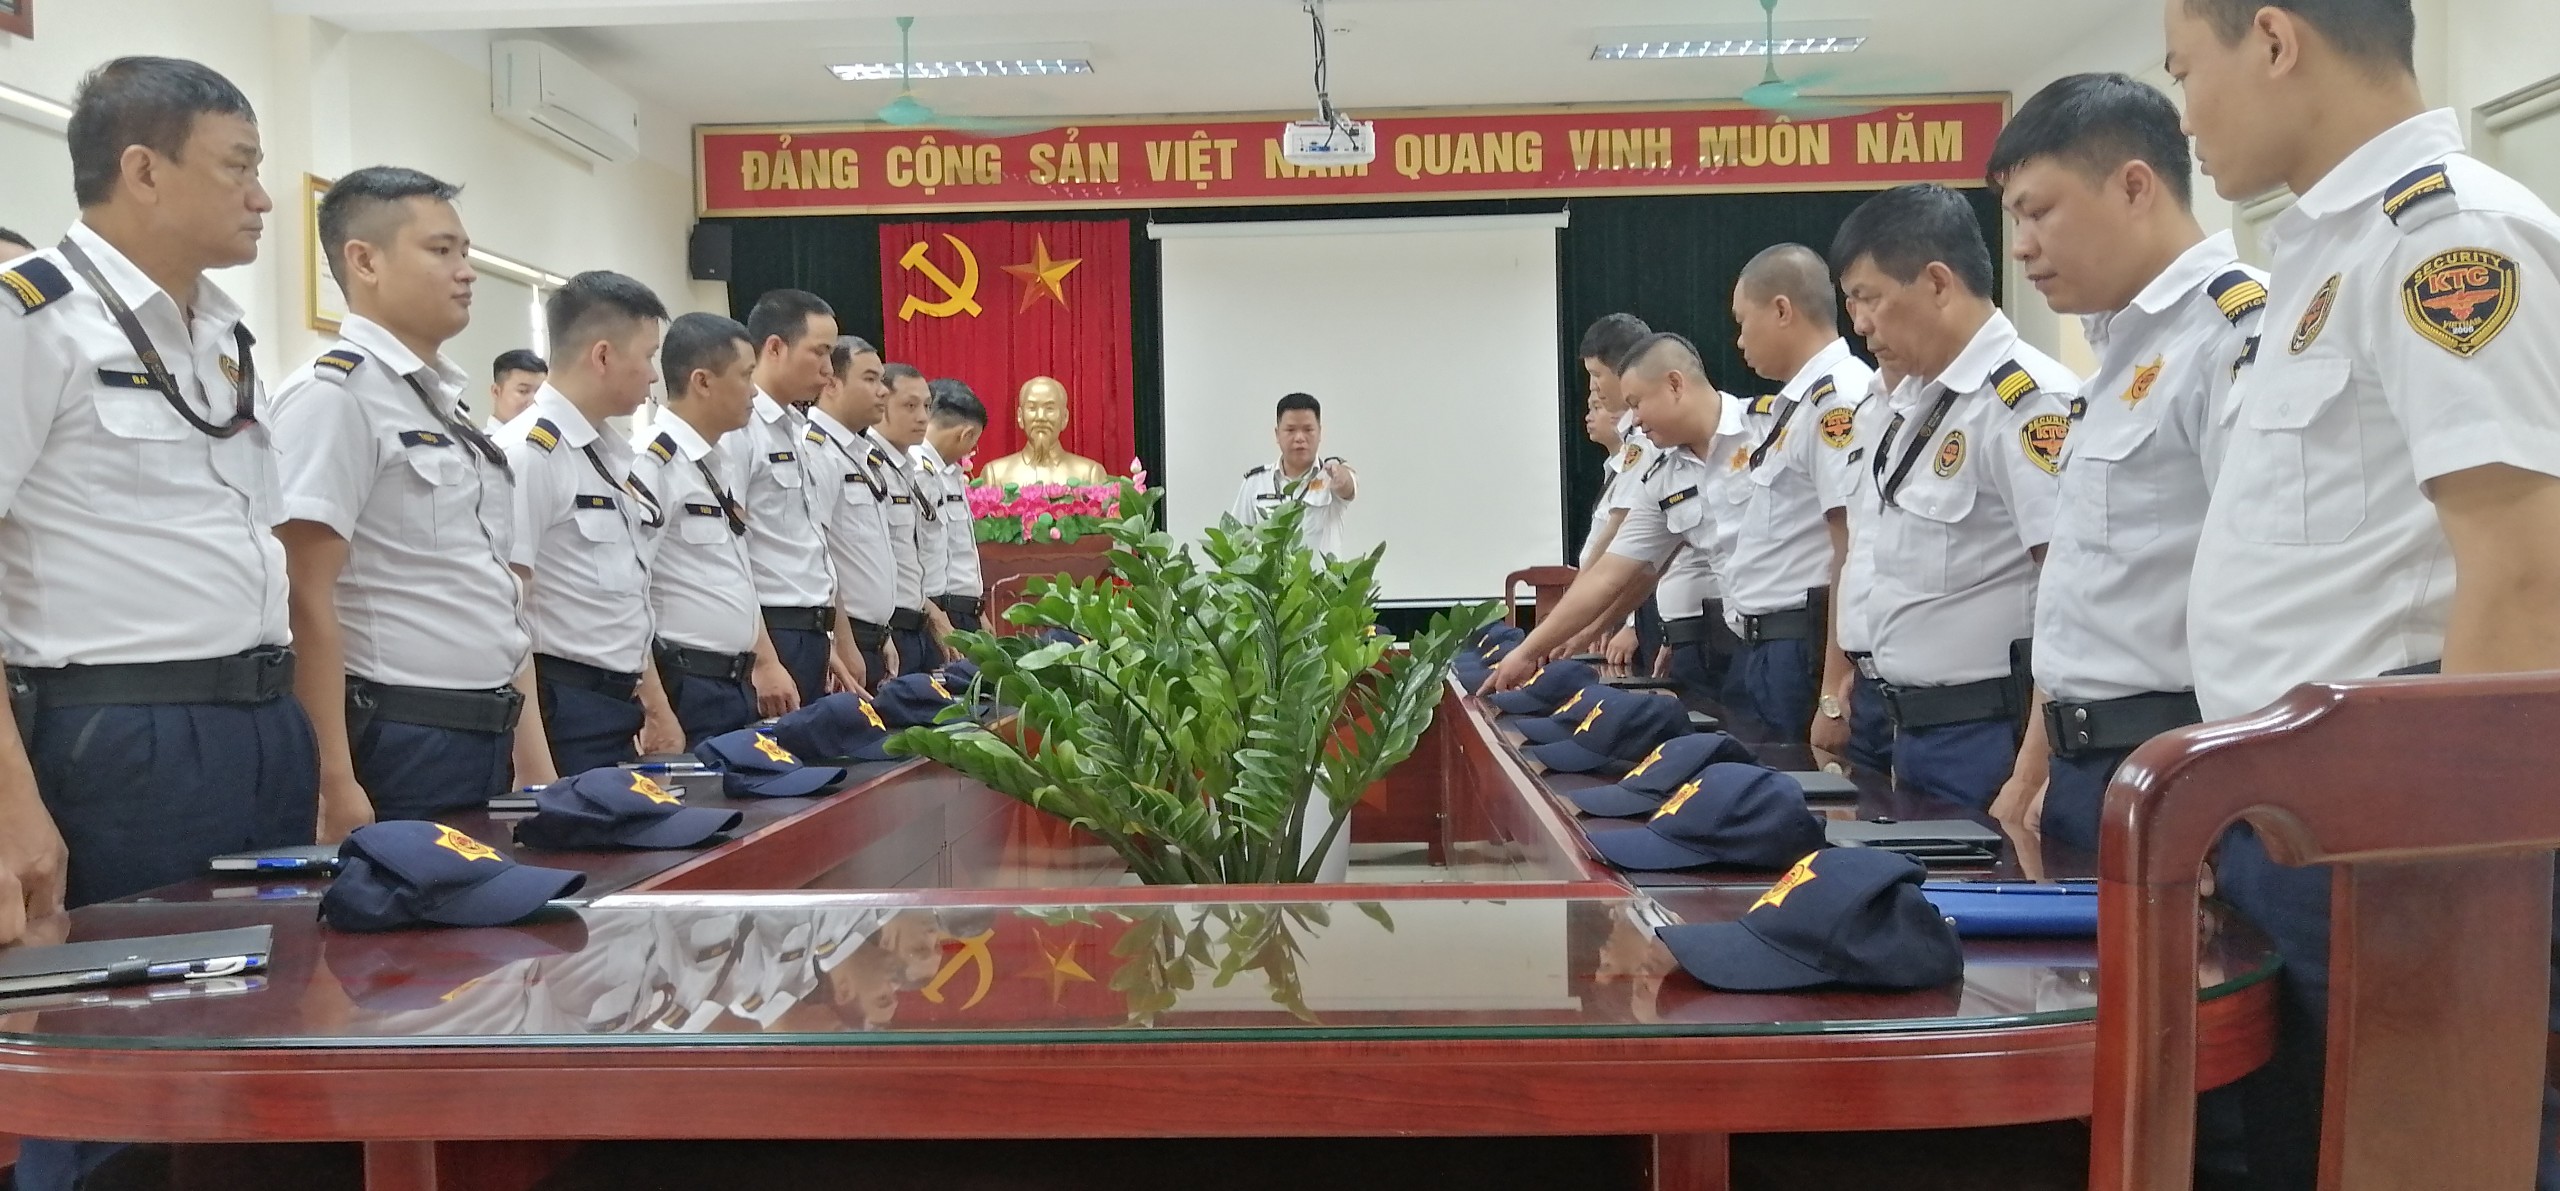 Professional Training for Security Guards in Hanoi